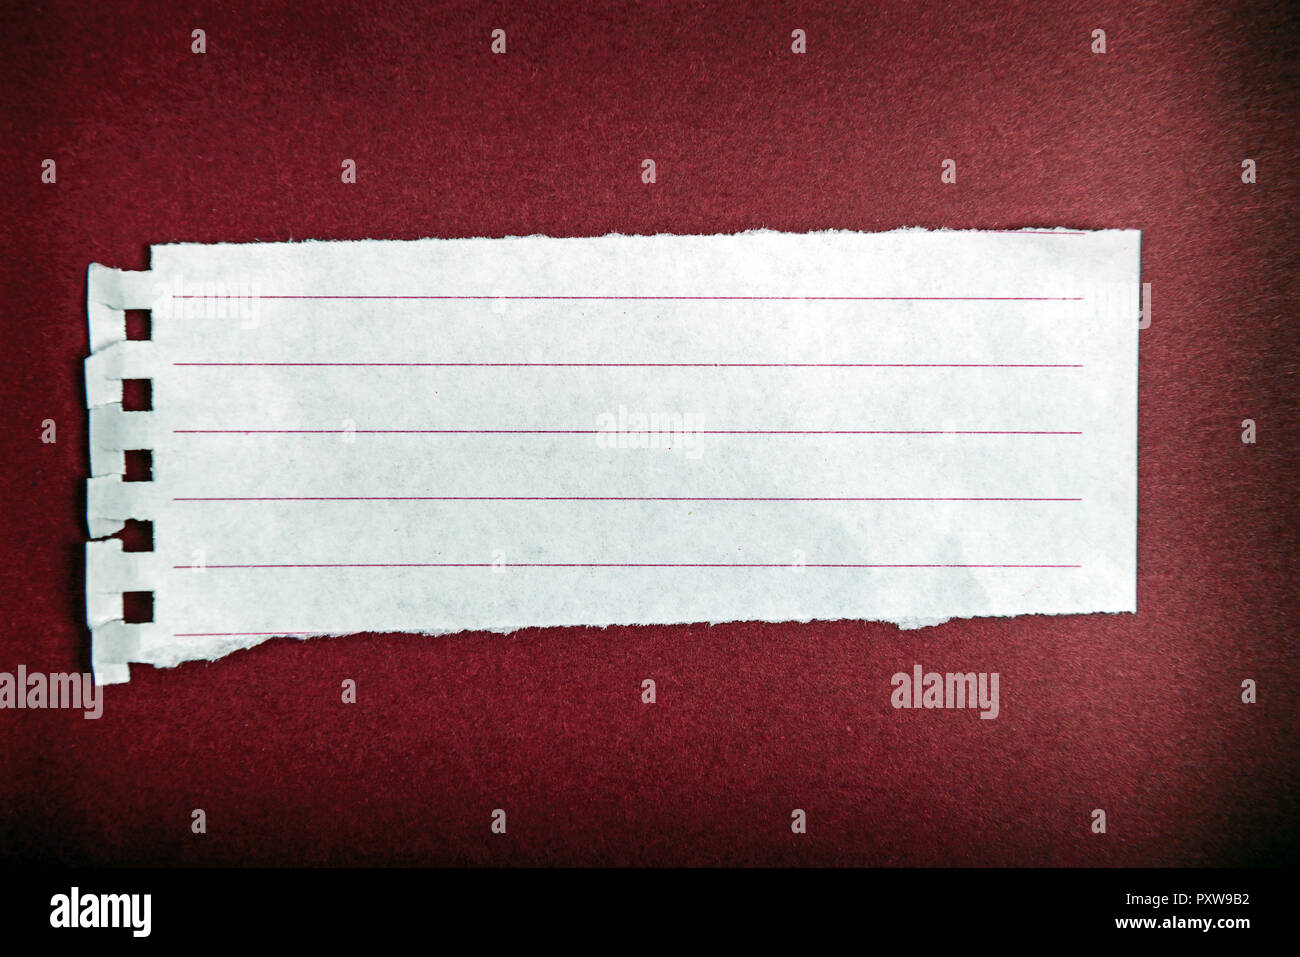 Turn notebook paper on dark red background Stock Photo